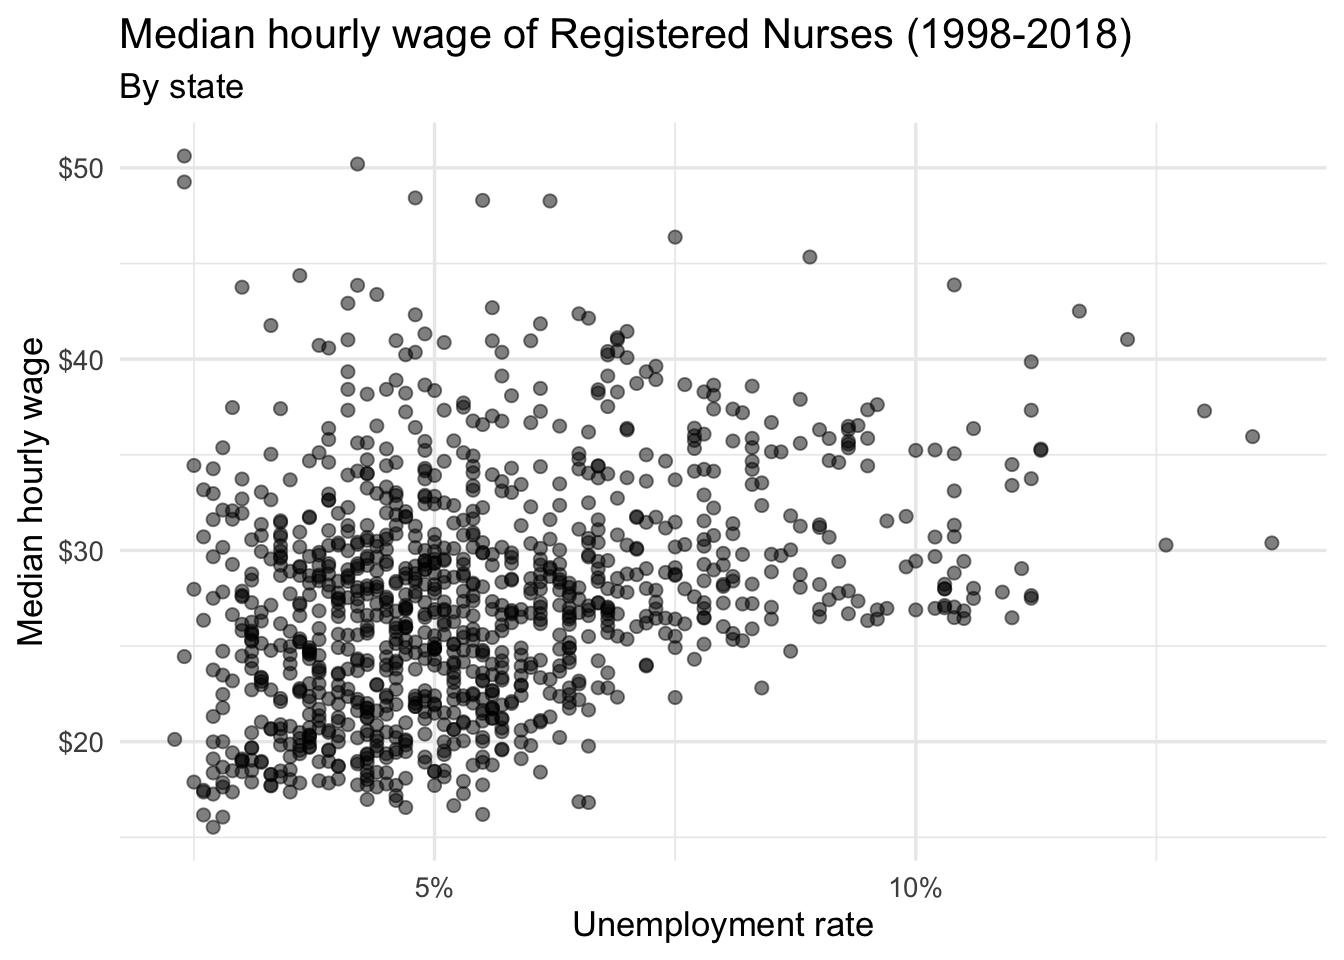 The figure is titled "Median hourly wage of Registered Nurses". It is a scatter plot with points for each of the 50 U.S. states from 1998 to 2008. The horizontal axis is labeled "Unemployment rate", beginning around 2% up to 14%. The horizontal axis is labelled "Median hourly wage", beginning with amounts under $20 up to approximately $50. The pattern is hard to discern but appears to show a positive correlation between the variables. As unemployment rate increases the median hourly wage also slightly increases. There is more variability in median hourly wage for unemployment rates below 7%.